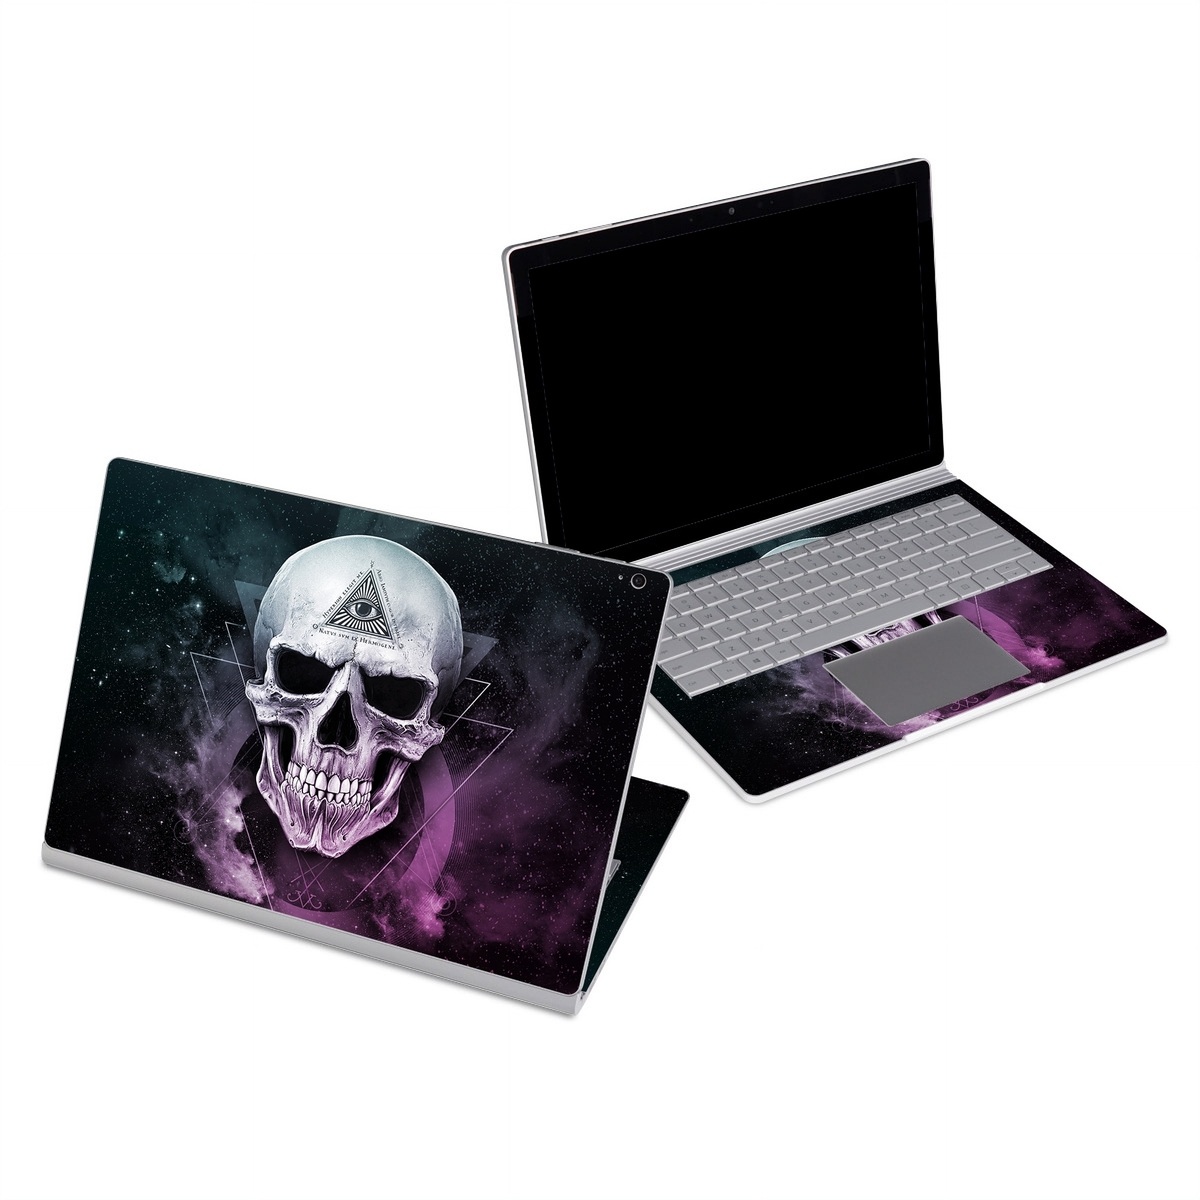 Microsoft Surface Book Series Skin design of Skull, Bone, Illustration, Font, Jaw, Fictional character, Graphic design, Graphics, Art, with black, white, gray, purple colors